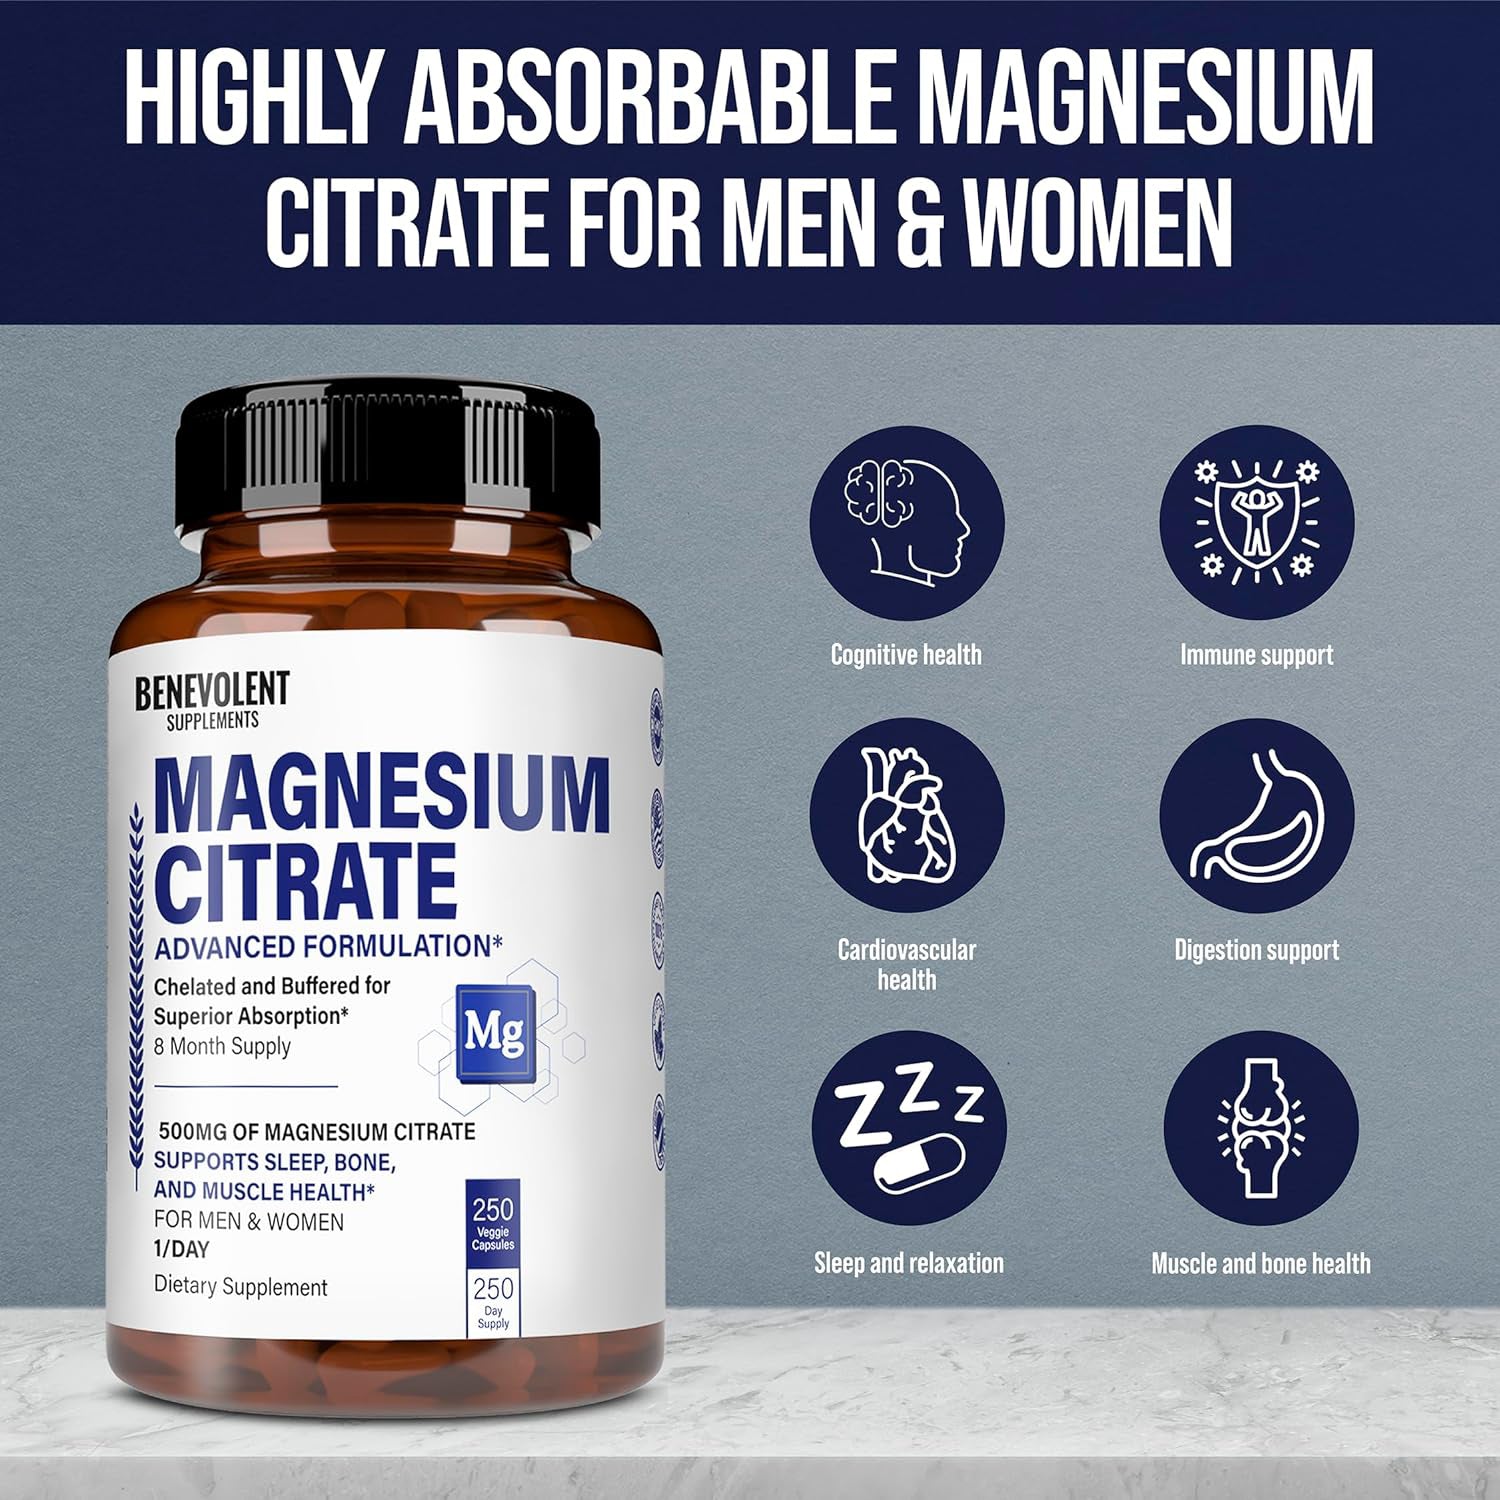 Highly absorbable Magnesium Citrate